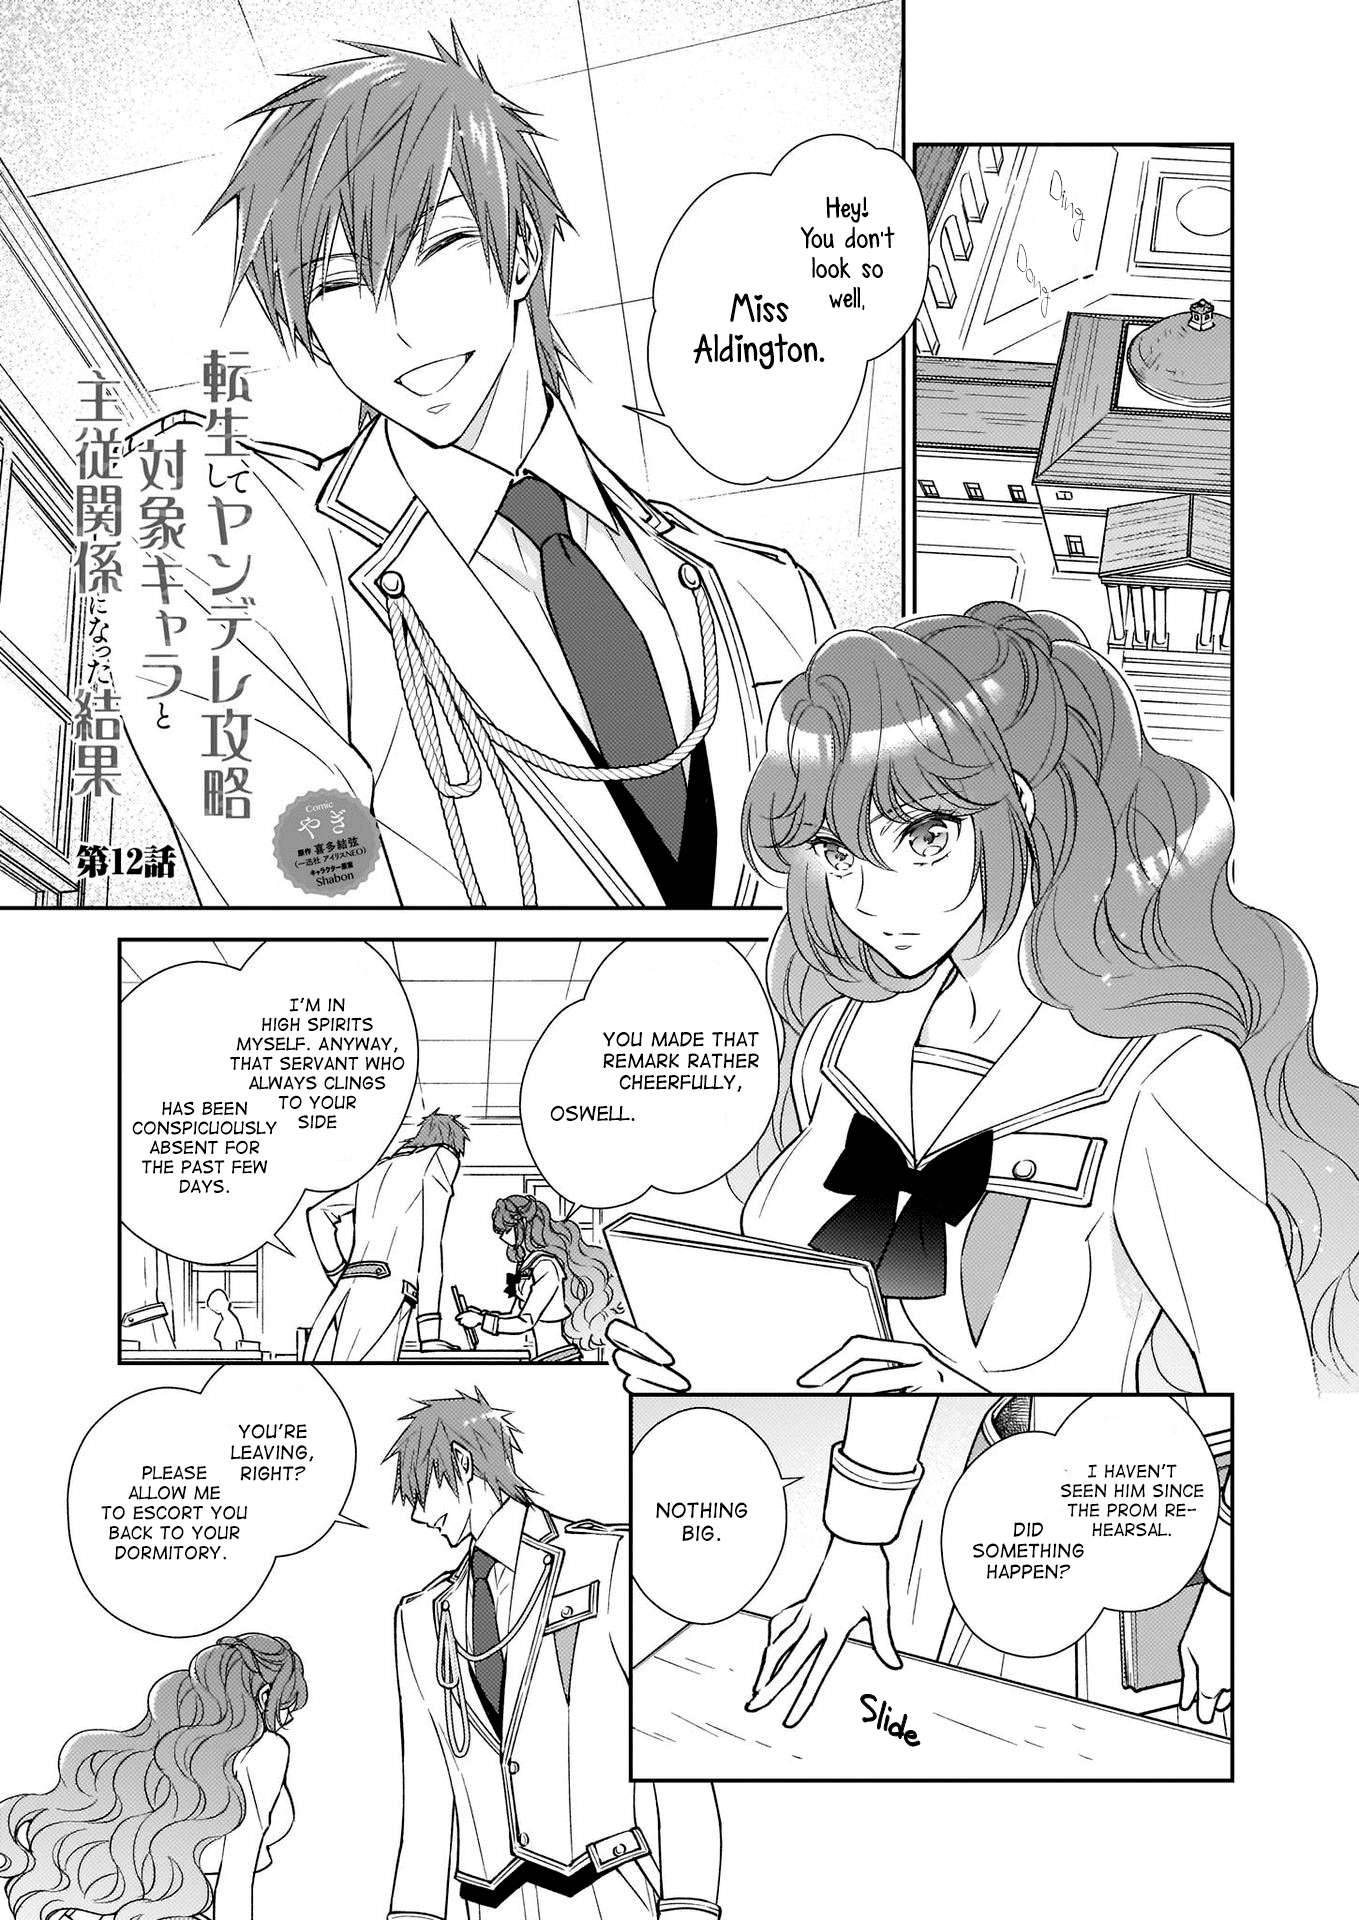 The Result Of Being Reincarnated Is Having A Master-Servant Relationship With The Yandere Love Interest - Page 1